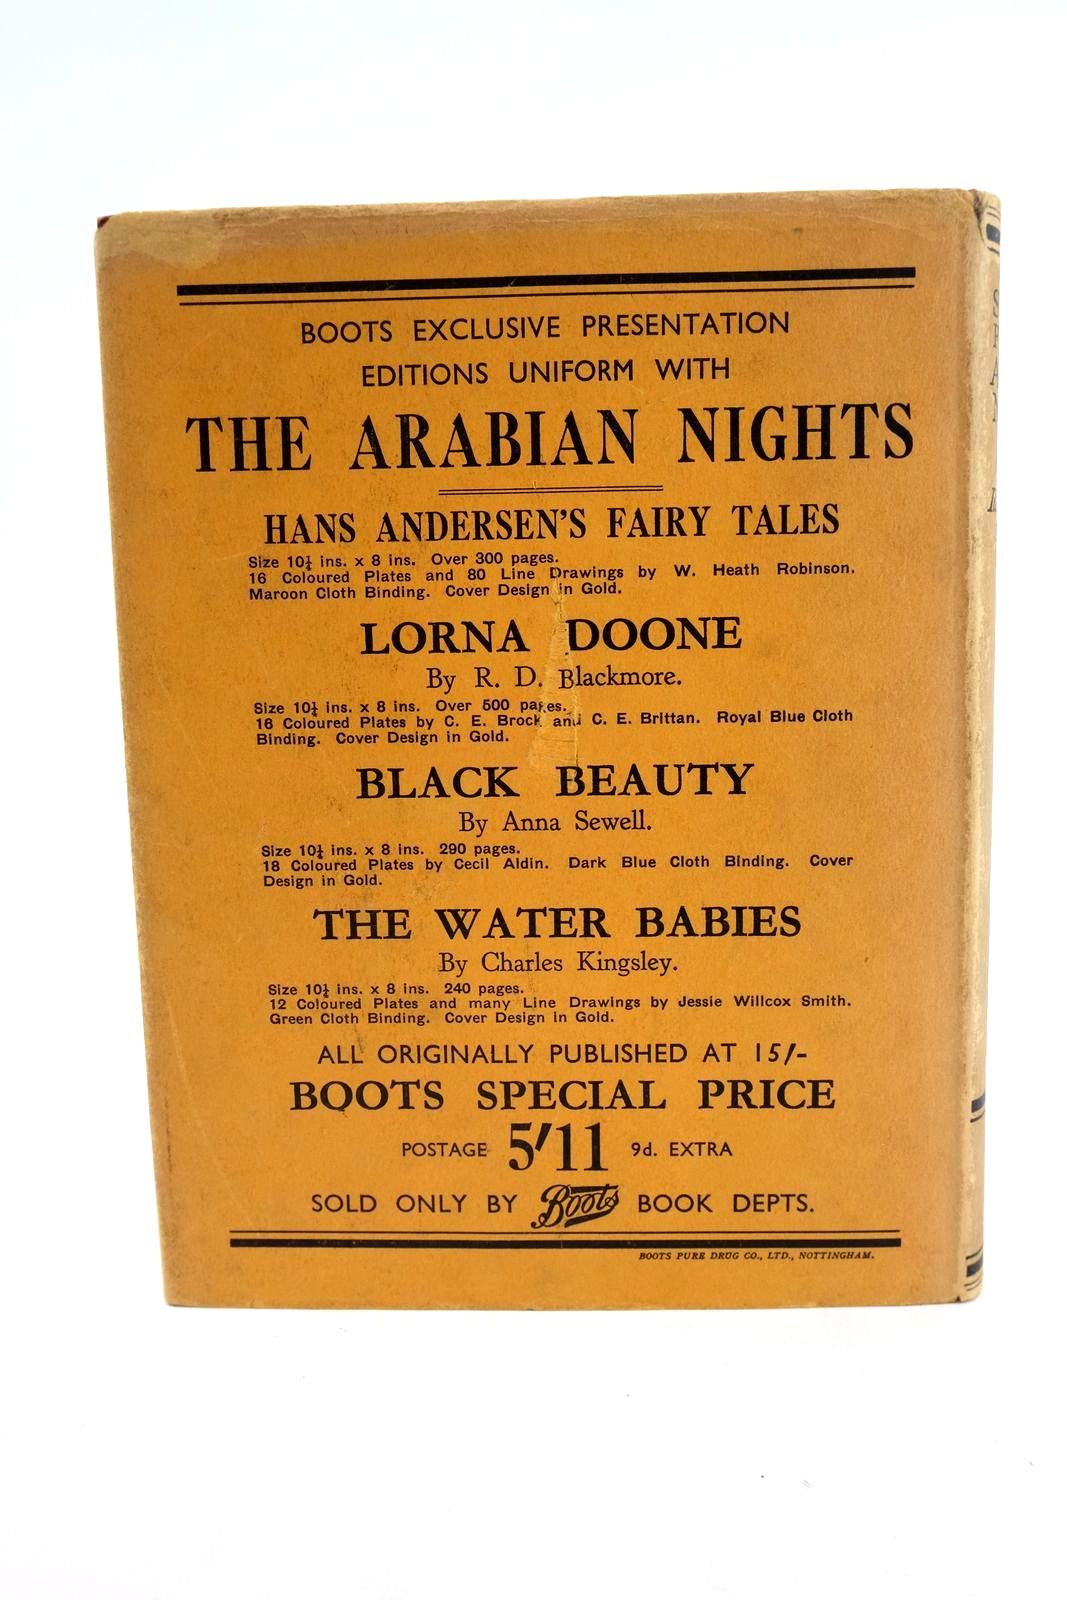 Photo of STORIES FROM THE ARABIAN NIGHTS written by Housman, Laurence illustrated by Dulac, Edmund published by Hodder & Stoughton, Boots the Chemists (STOCK CODE: 1324330)  for sale by Stella & Rose's Books